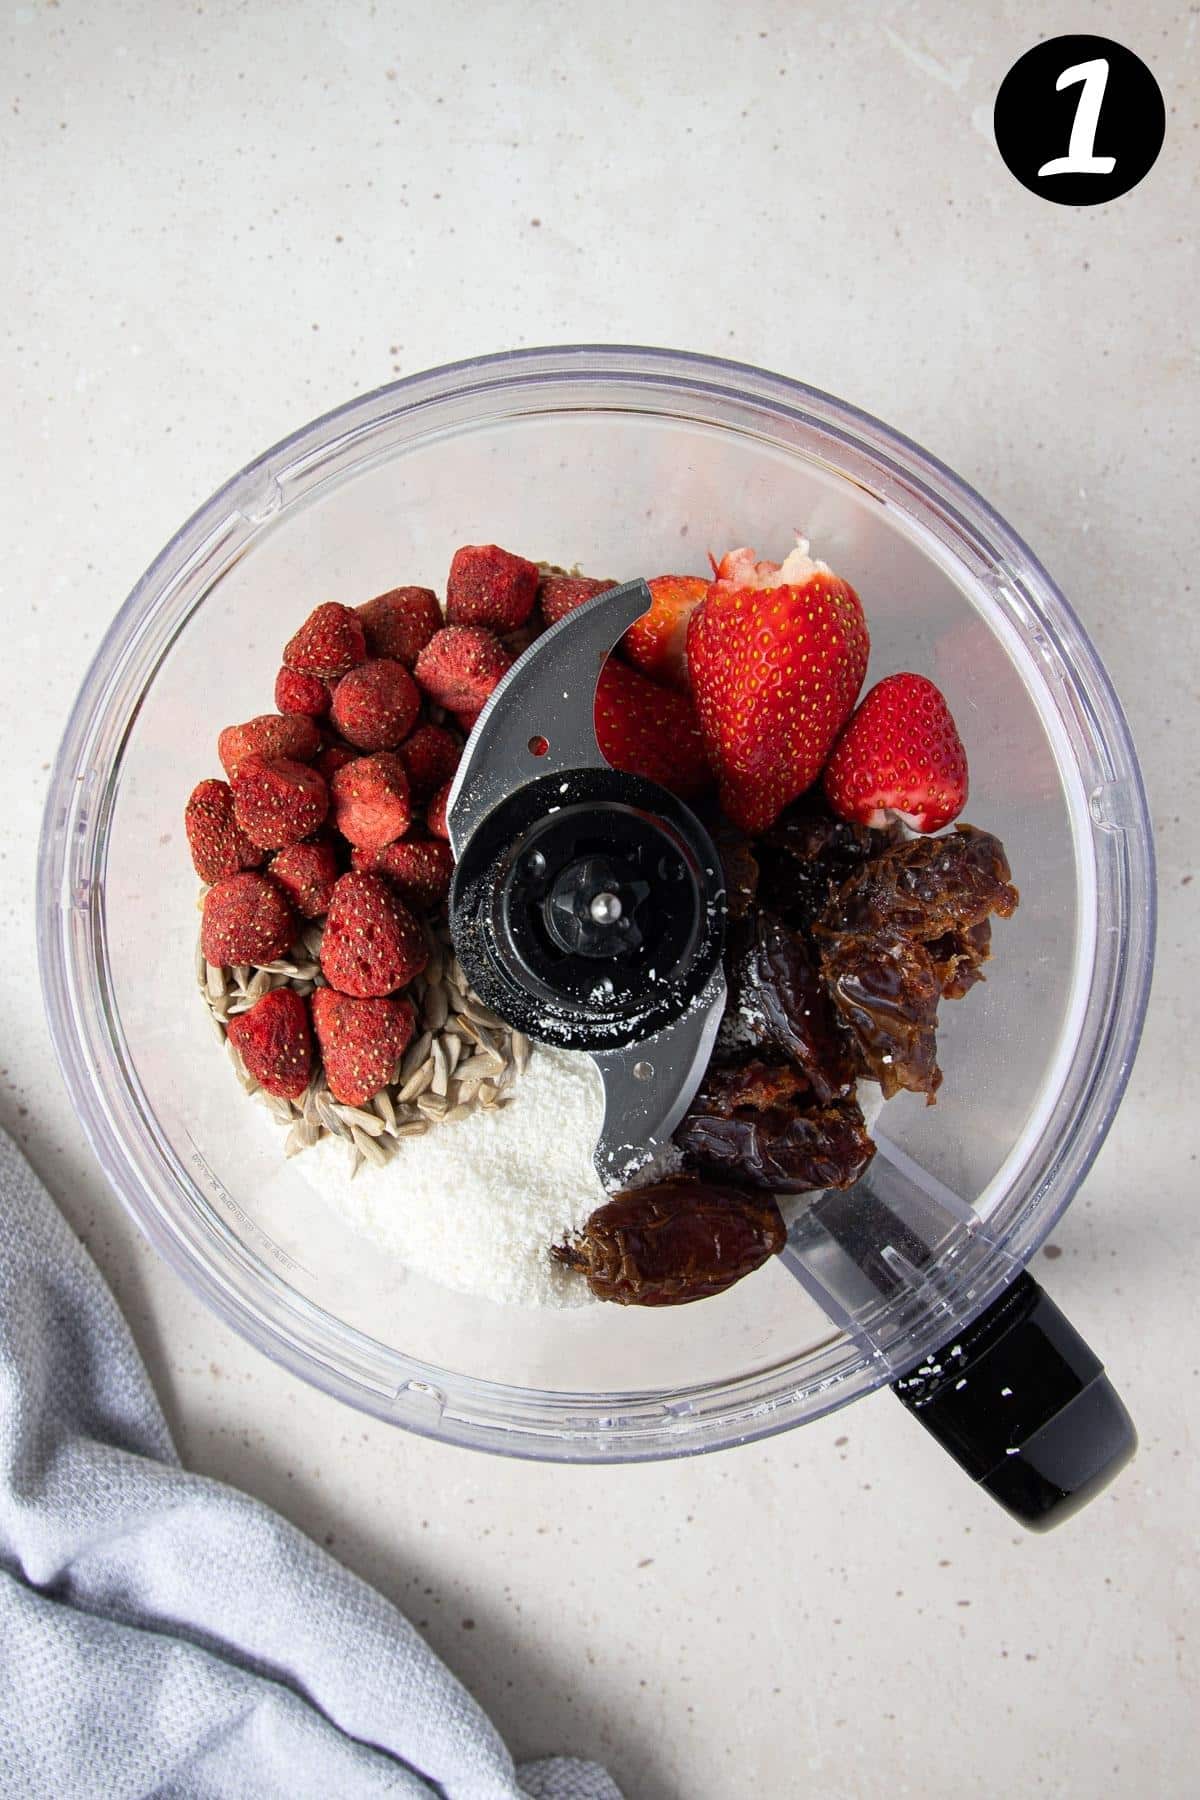 strawberries and dates with other ingredients in a food processor.